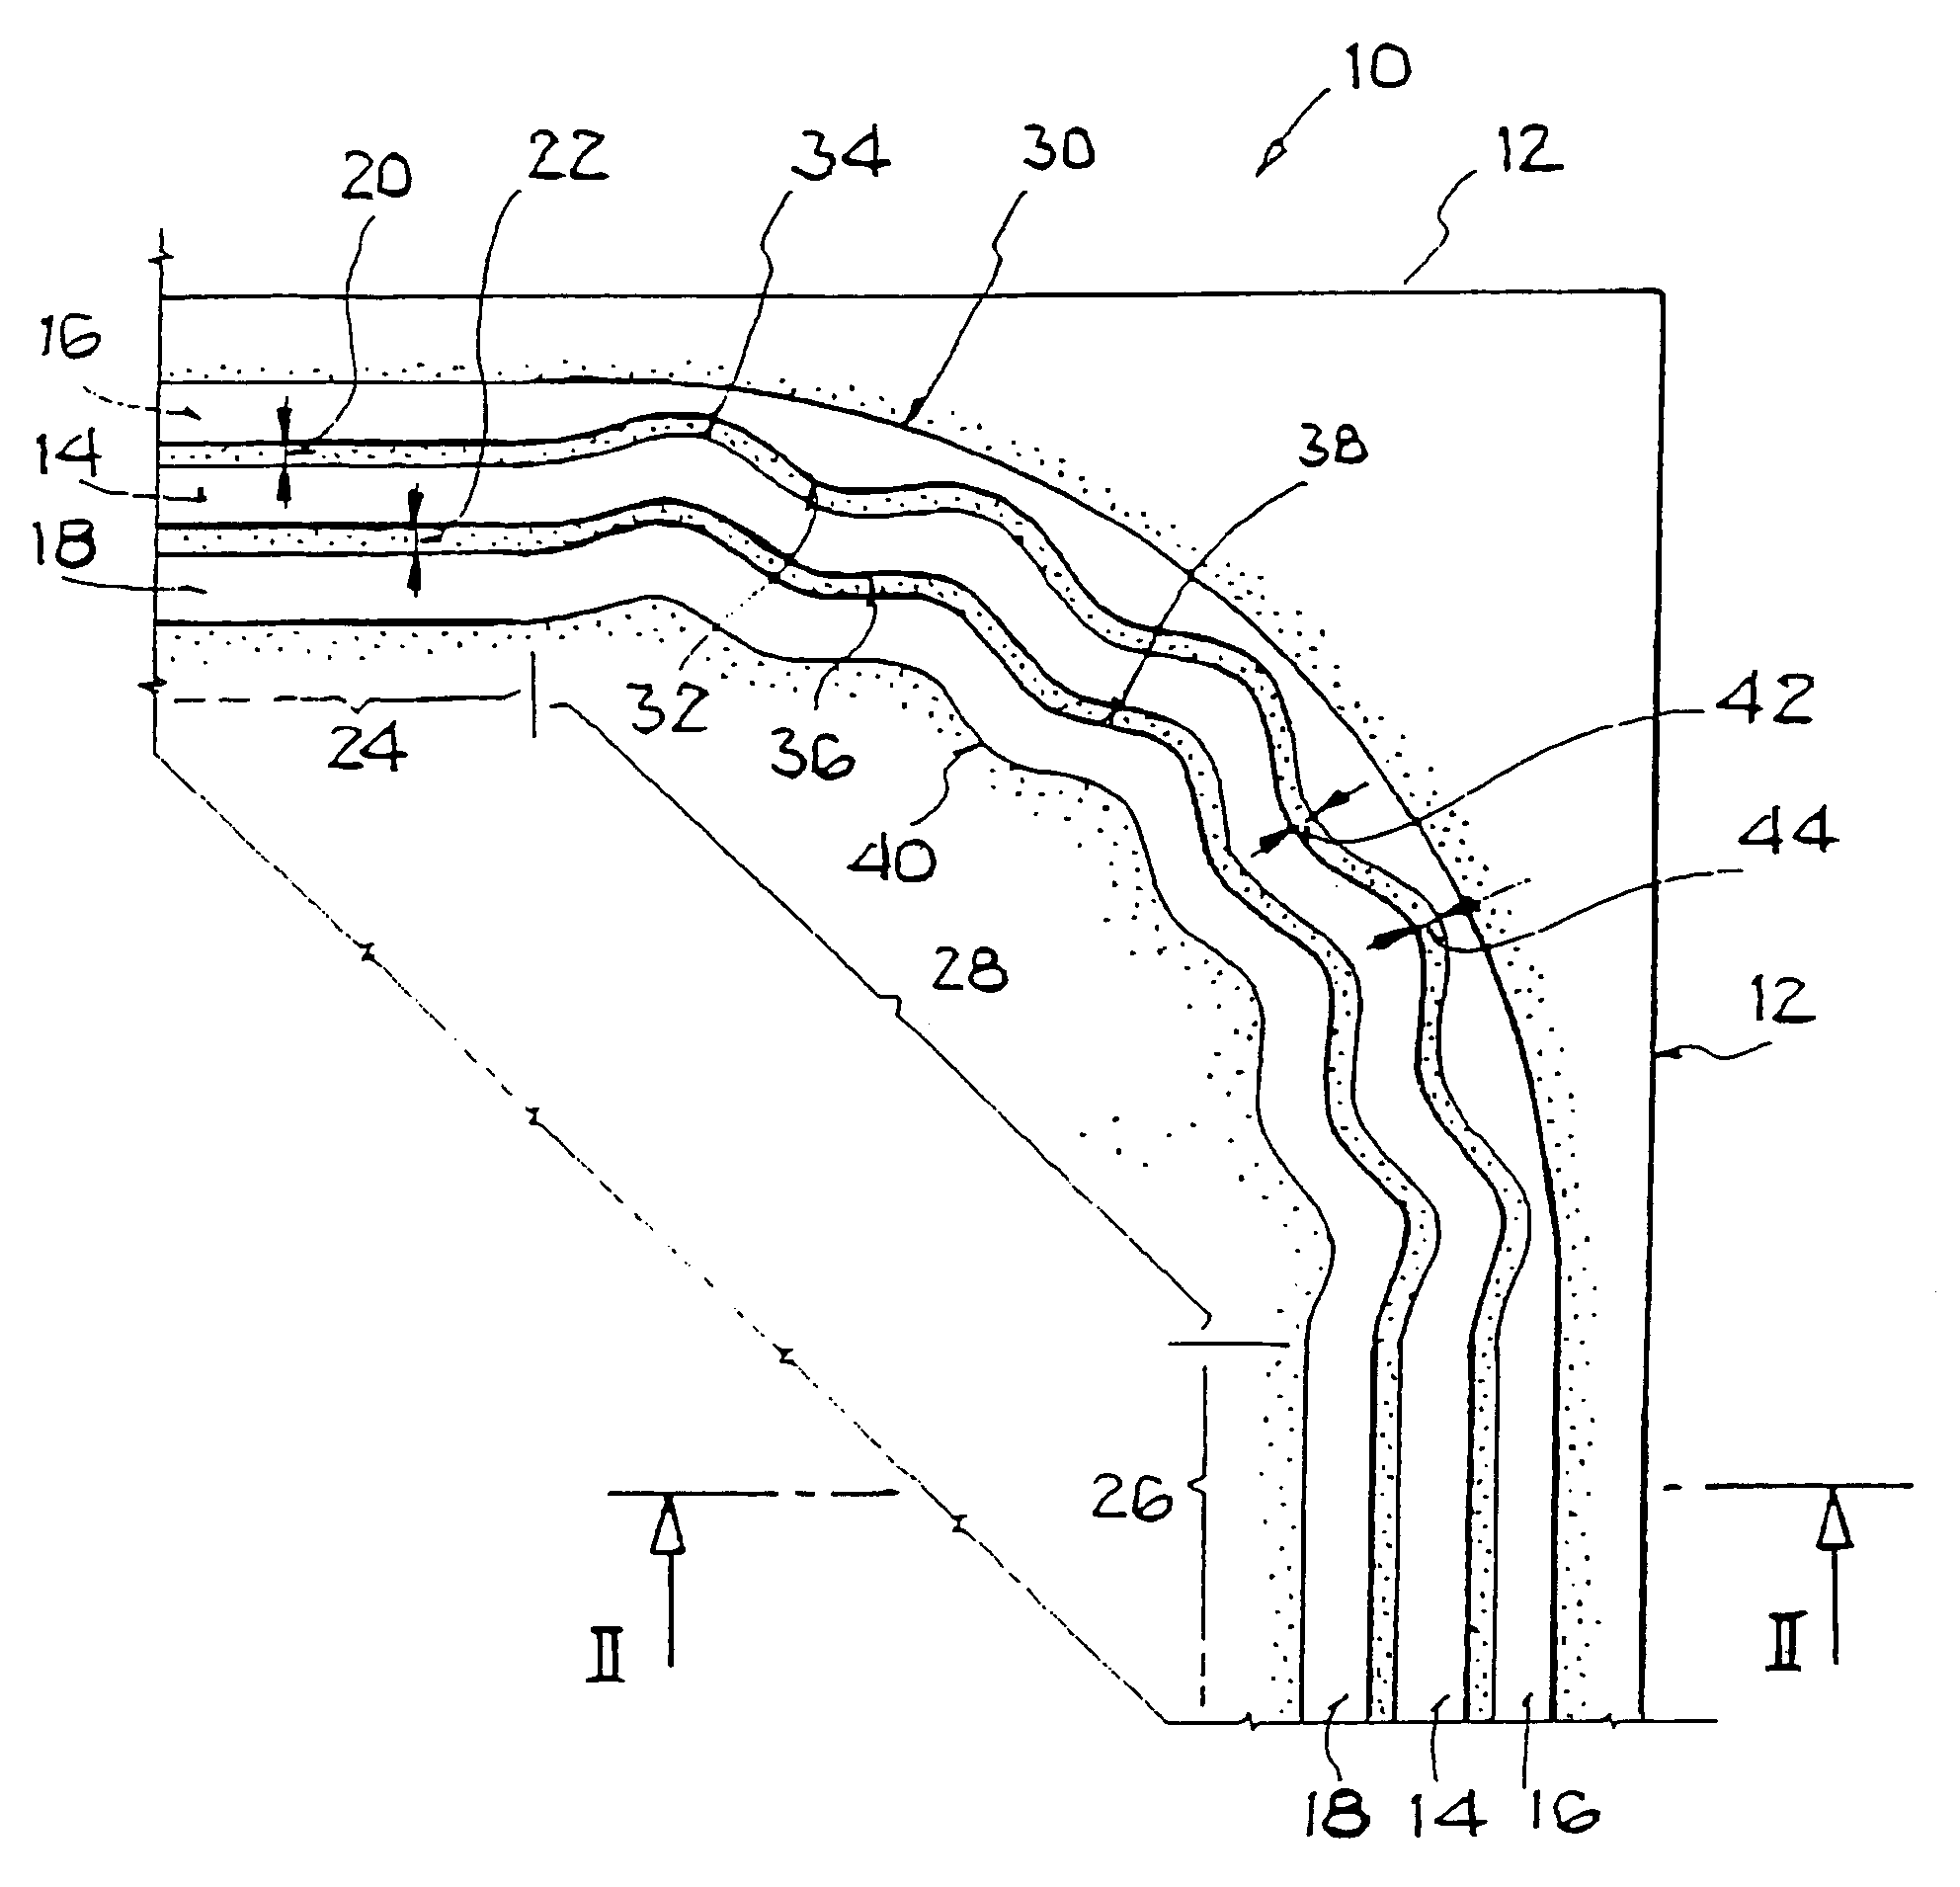 Planar microwave line having microstrip conductors with a directional change region including a gap having periodic foldings